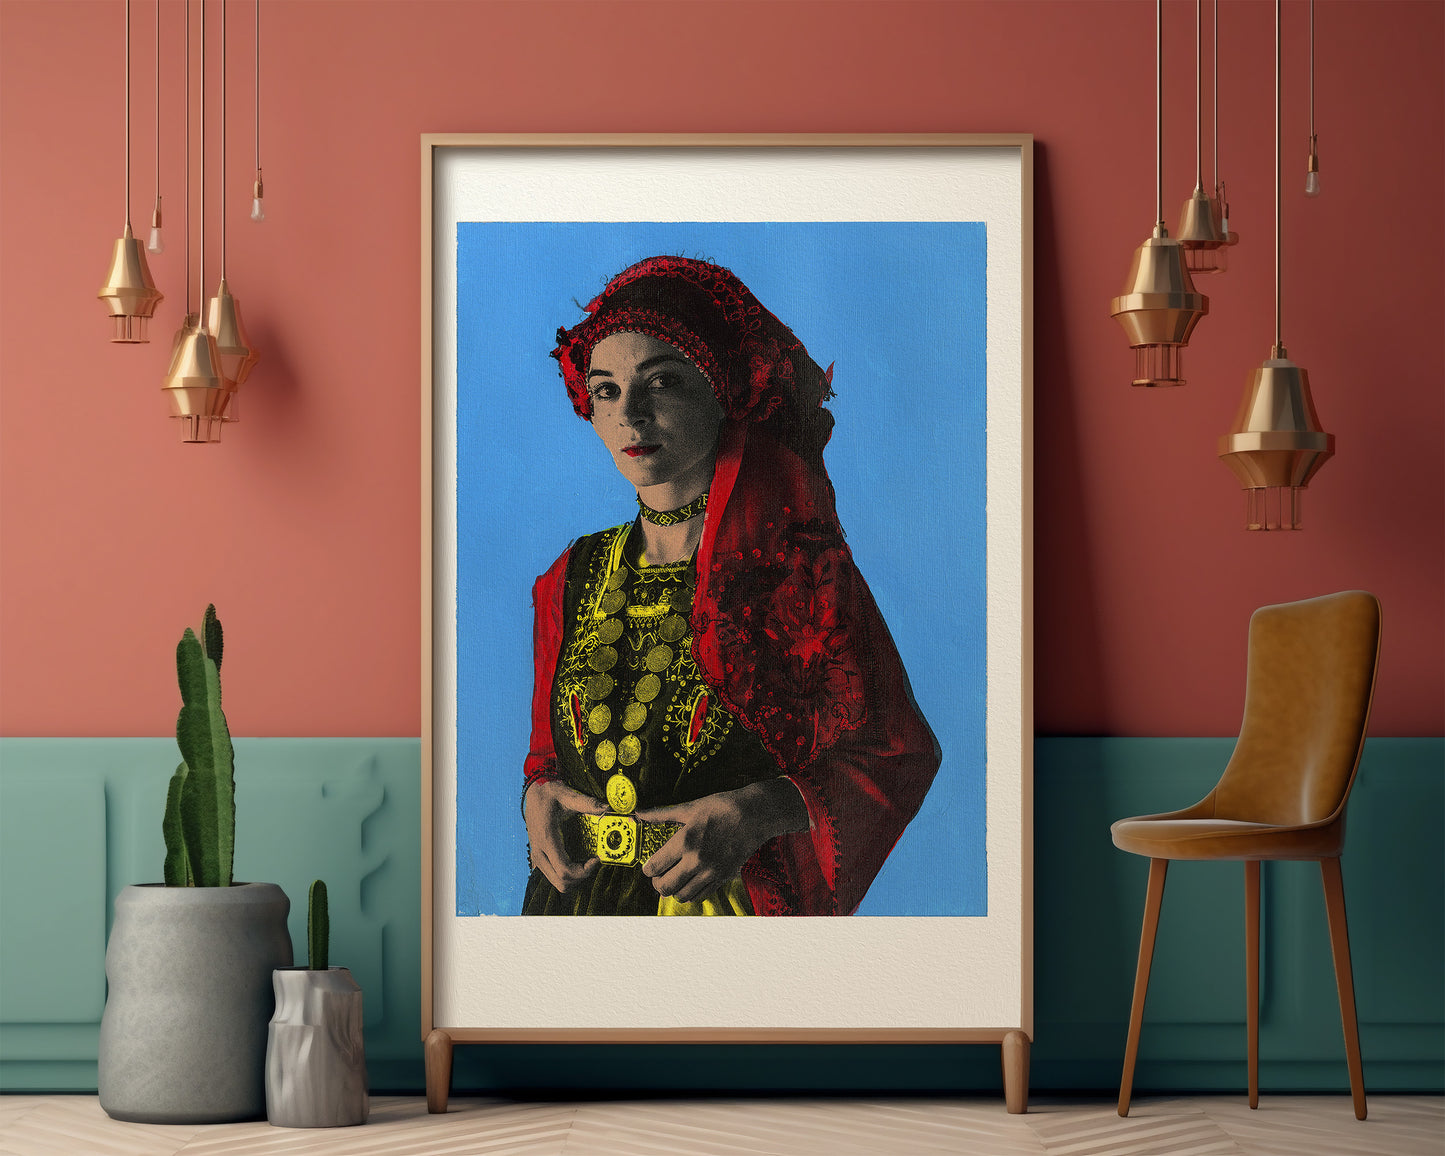 Painting Pop Art Wall Art from Greece | Blue Red Metaxades Costume from Evros, Thrace, by George Tatakis - inside an eclectic room